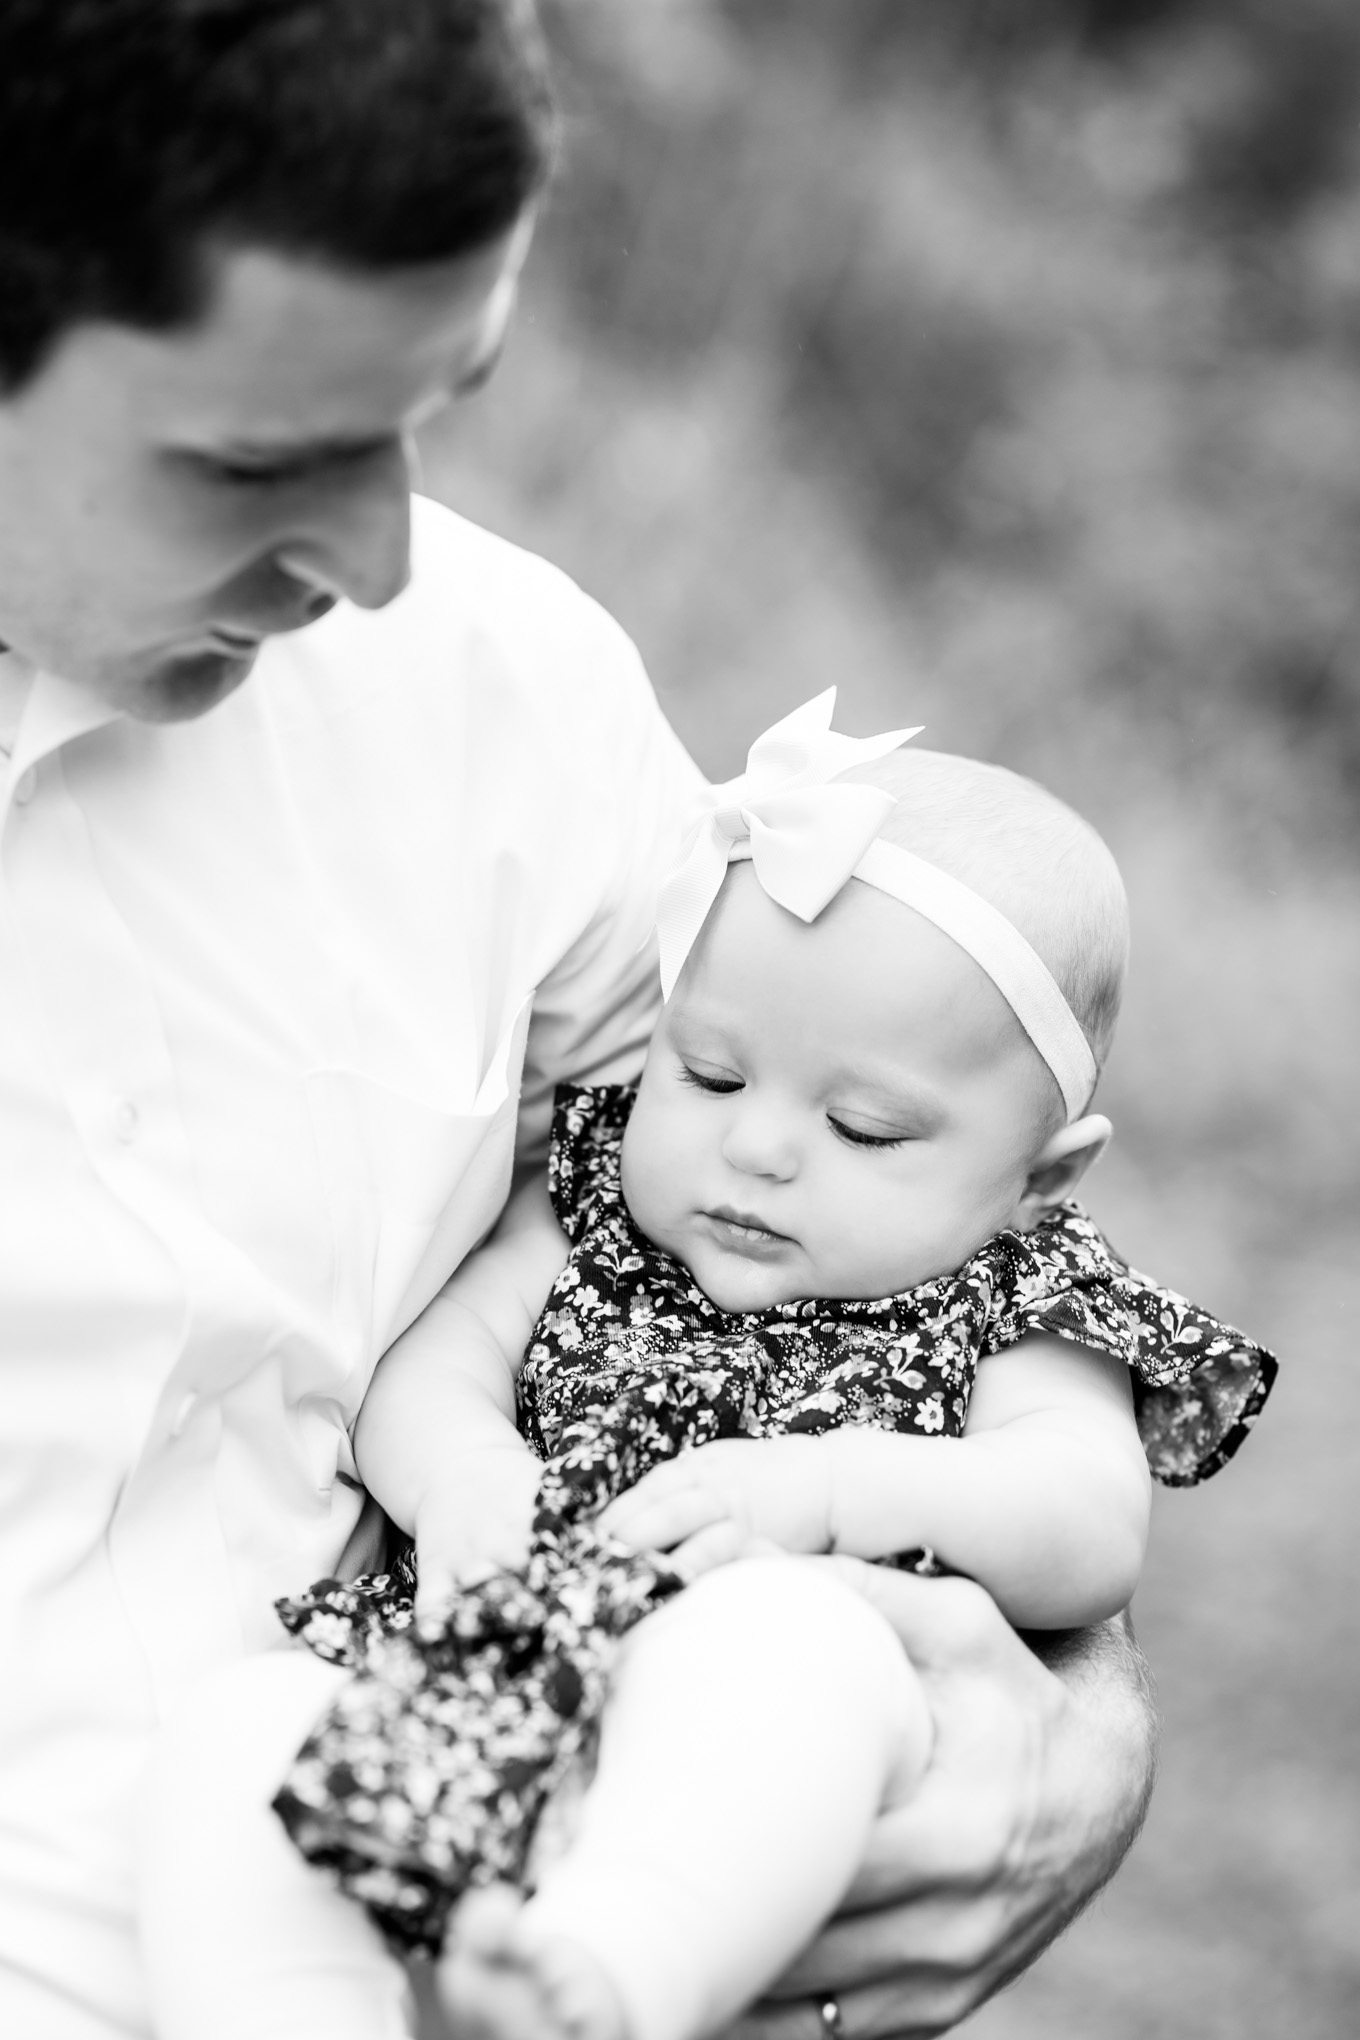 Columbus Day, Arlington, northern VA, family photos, siblings, style guide, weekend vibes, father daughter, baby girl, black and white photography